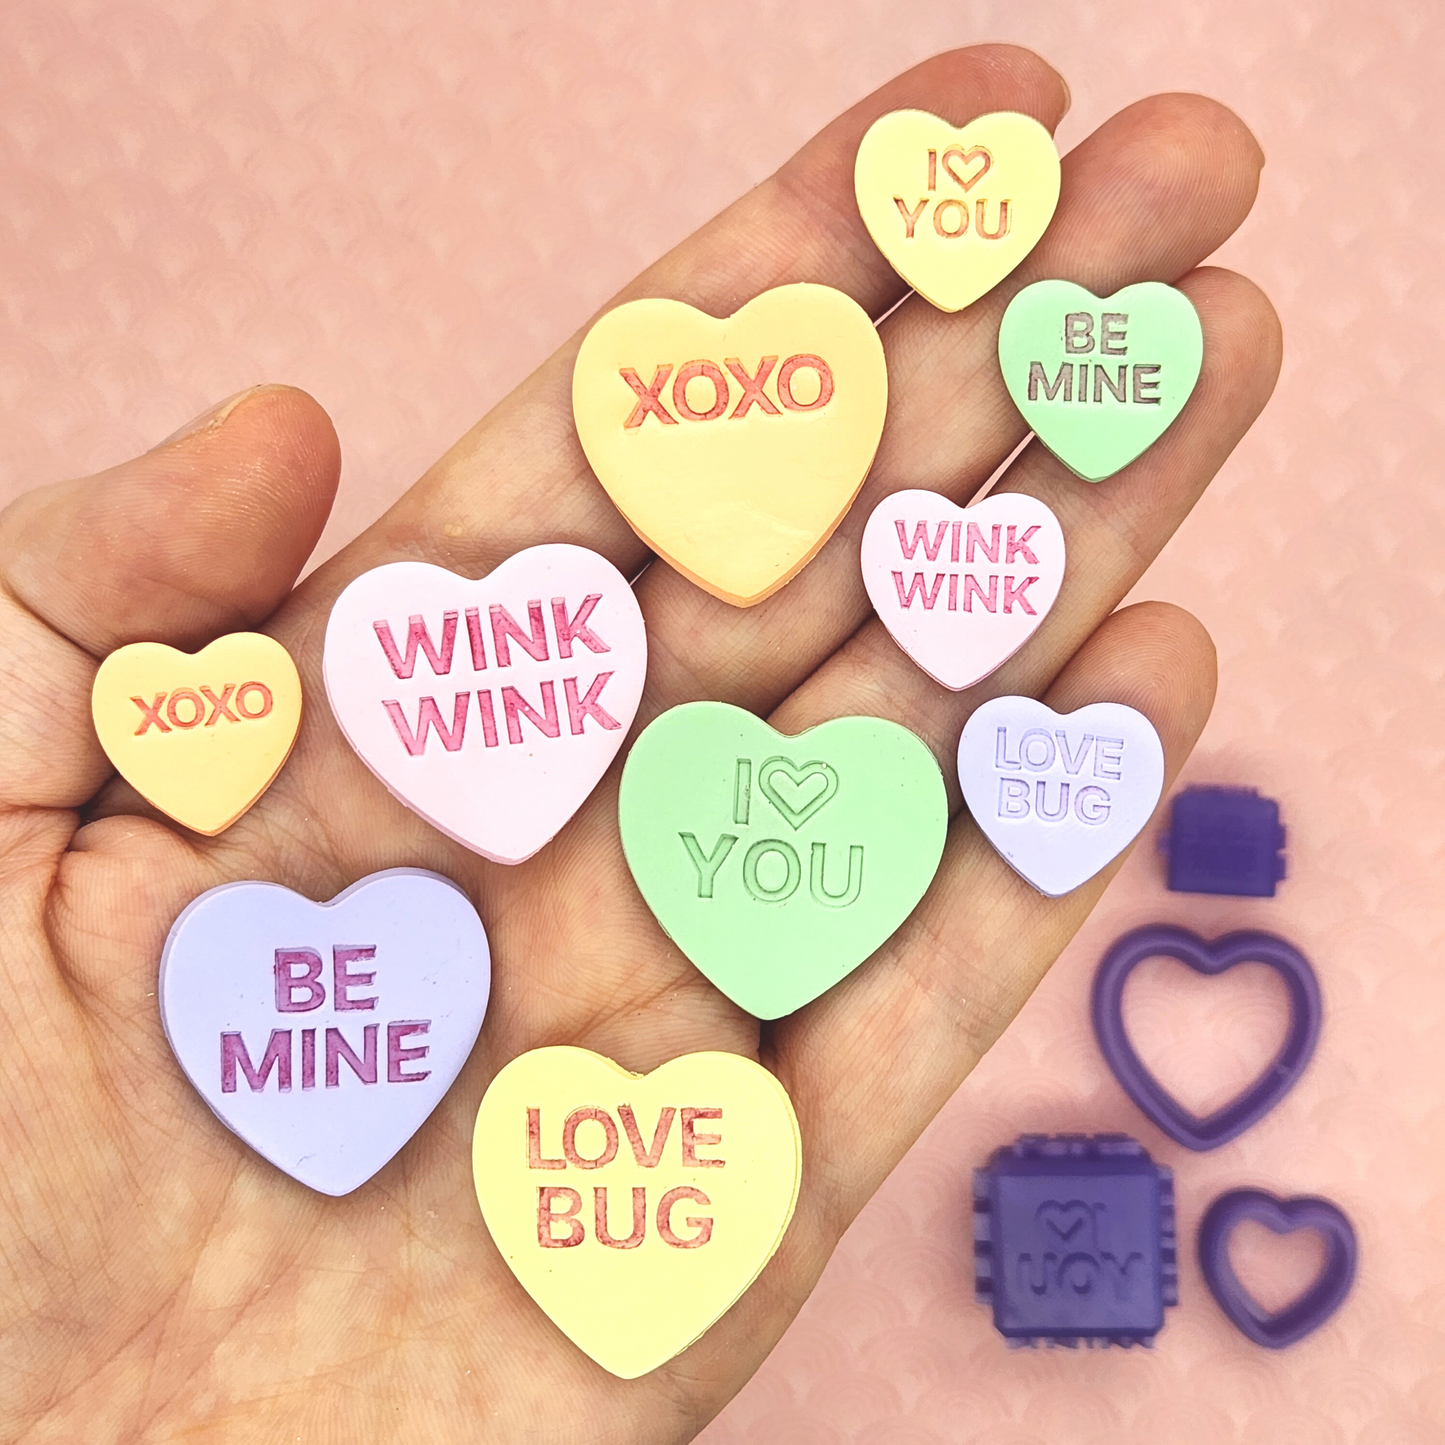 0.75 in, 1 in Hard Pass Conversation Heart Clay Cutter – Rays of